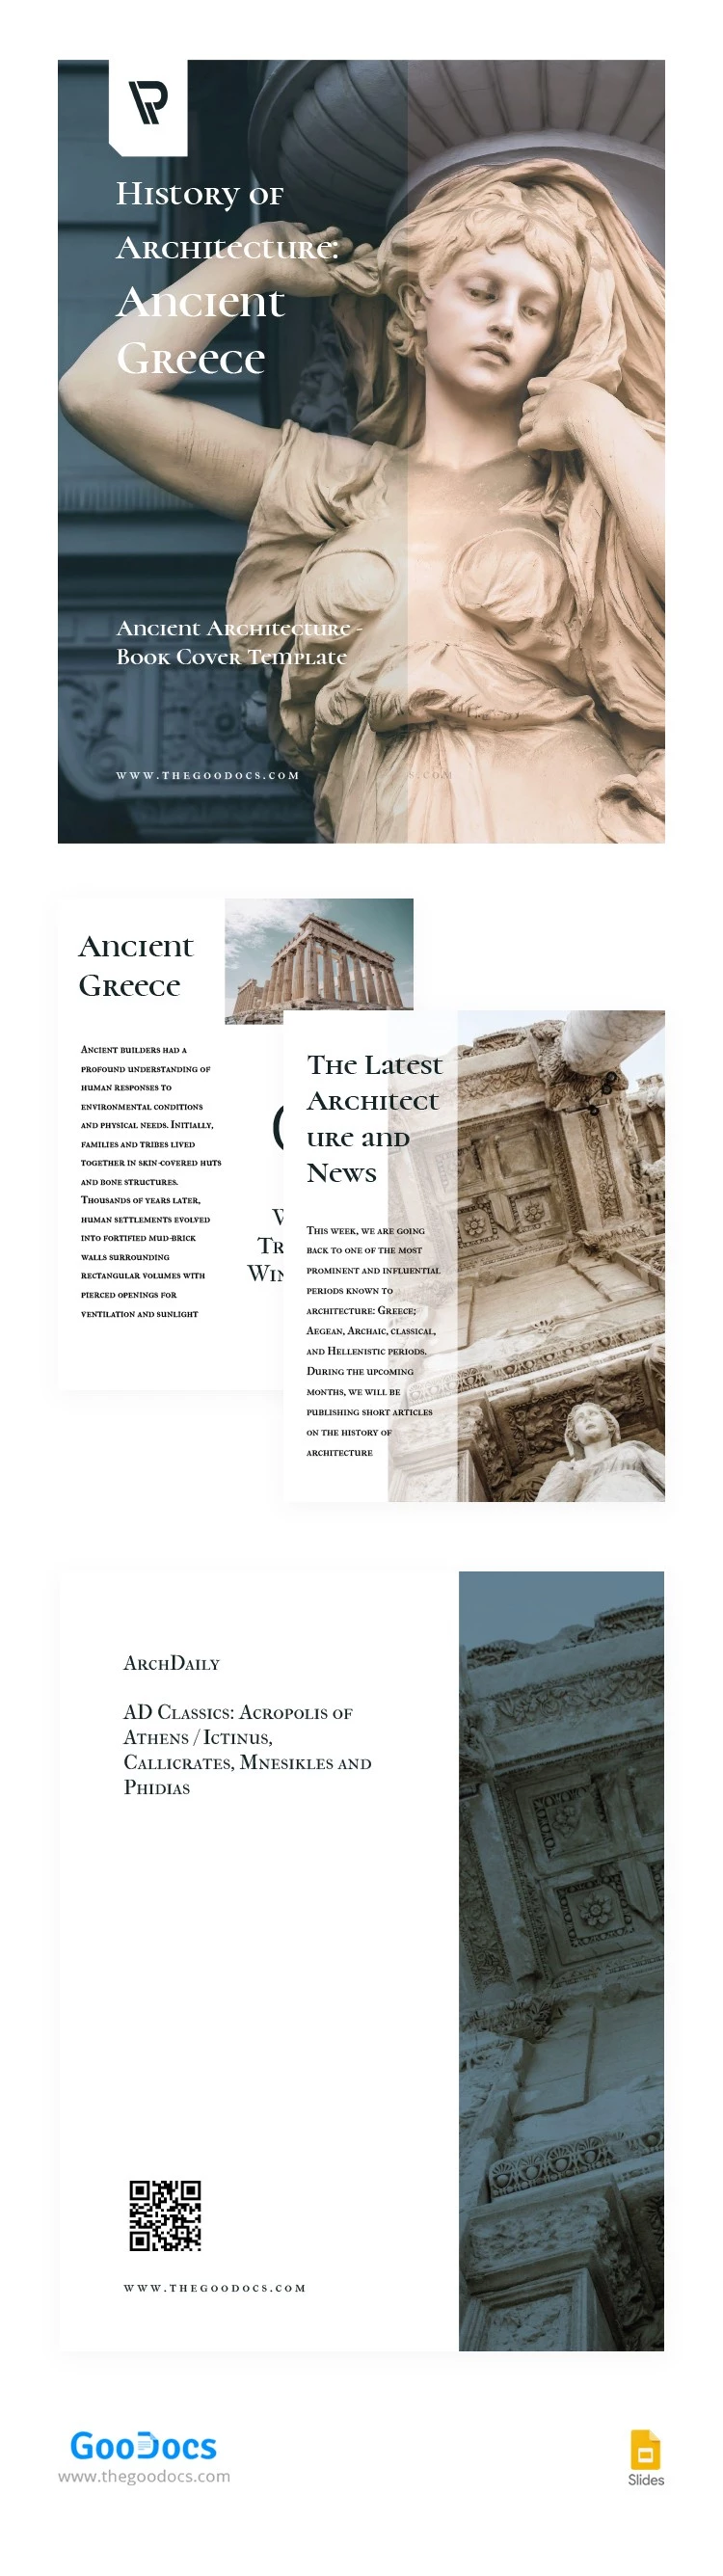 Ancient Architecture Book - free Google Docs Template - 10062764